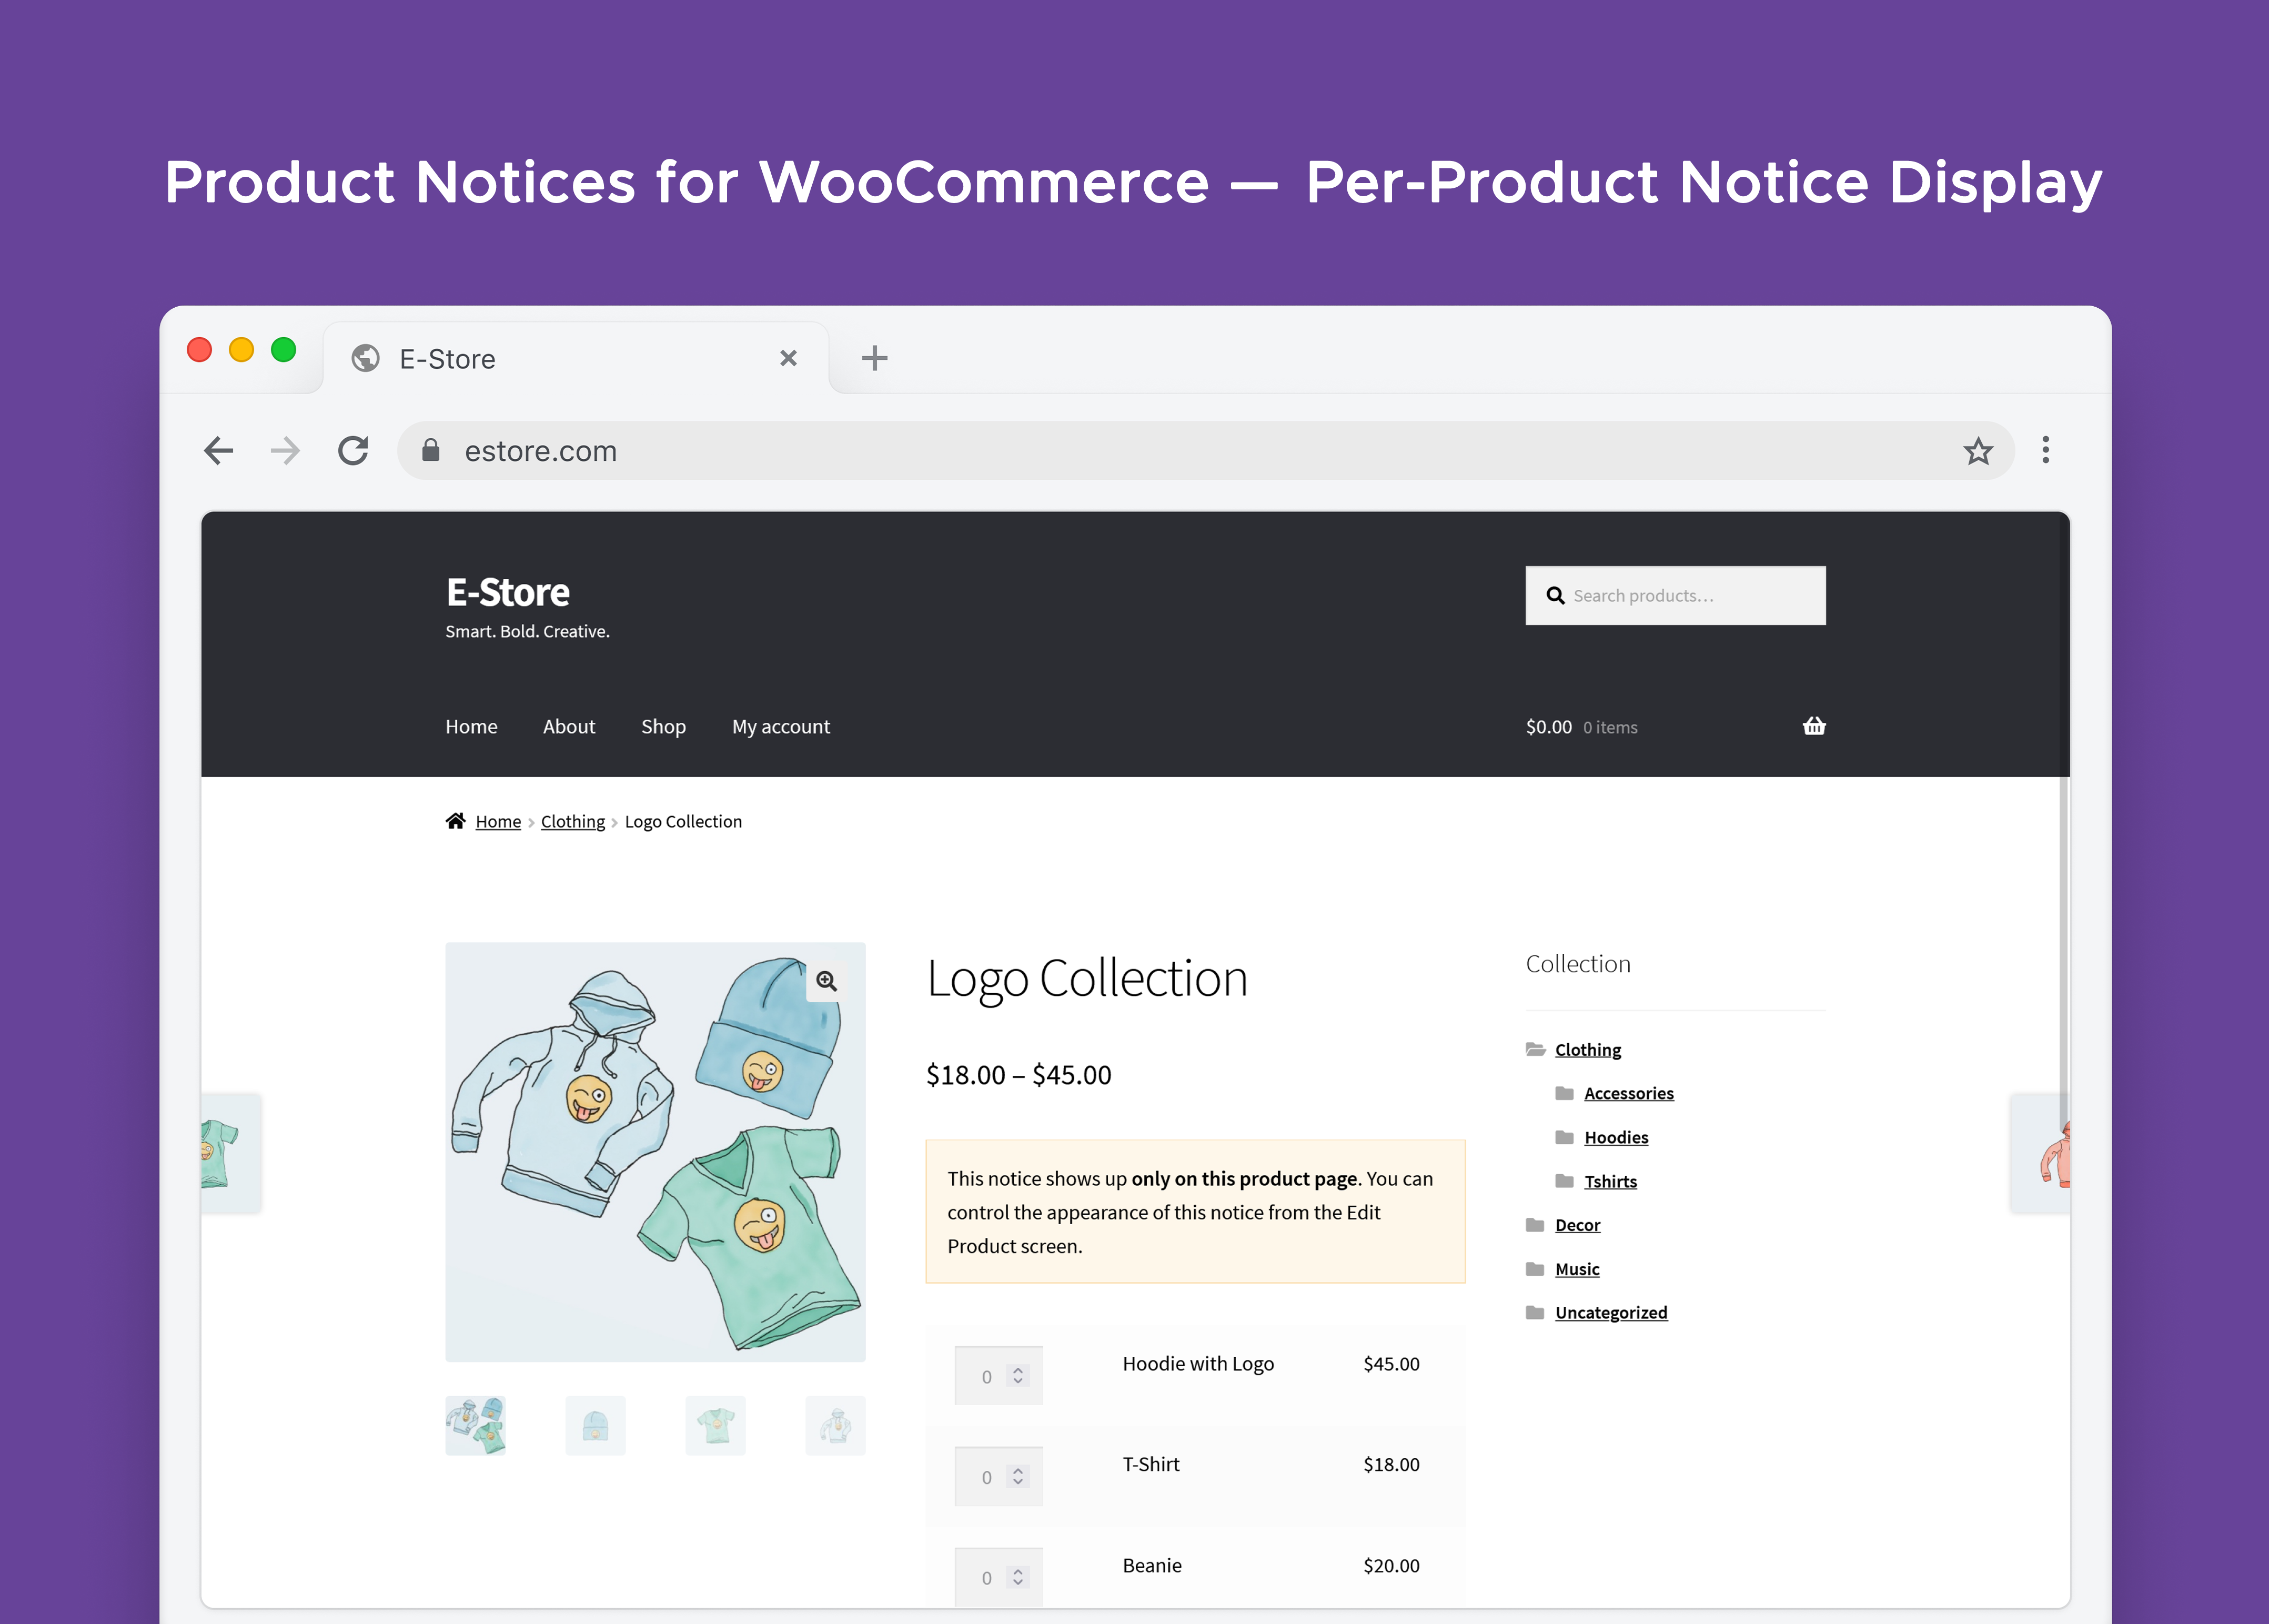 Product Notices for WooCommerce - Per-Product Notice Display